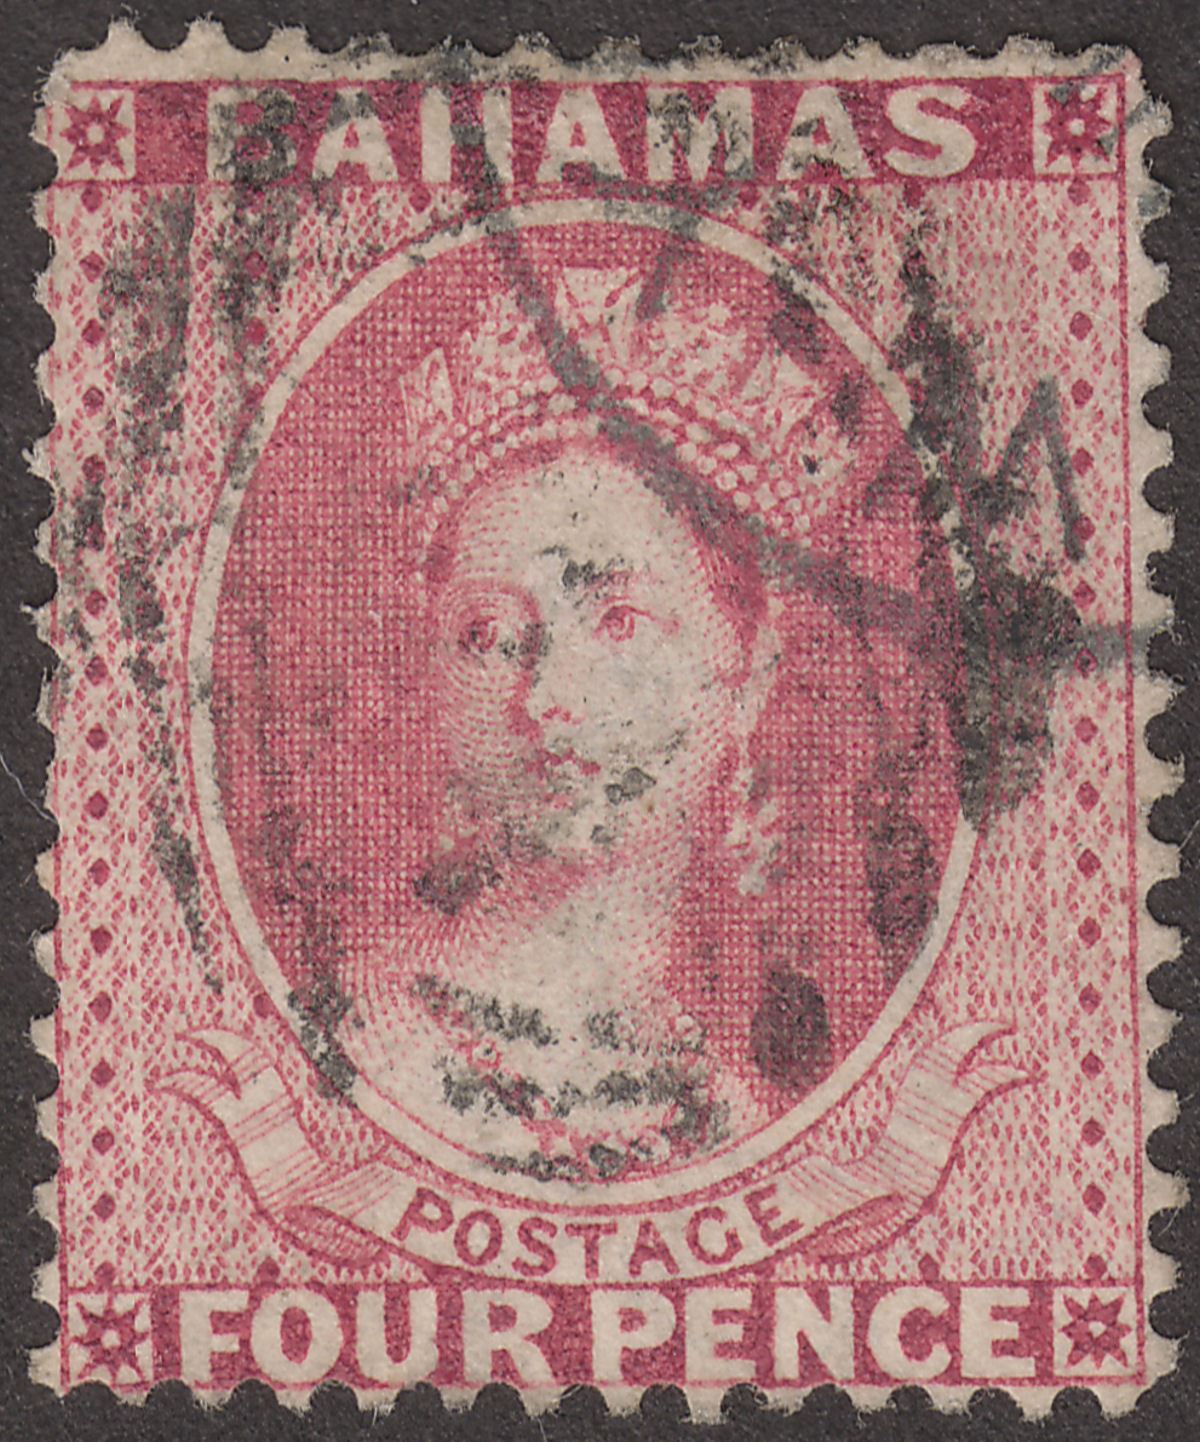 Bahamas 1876 QV Chalon 4d Bright Rose perf 14 Used SG35 cat £40